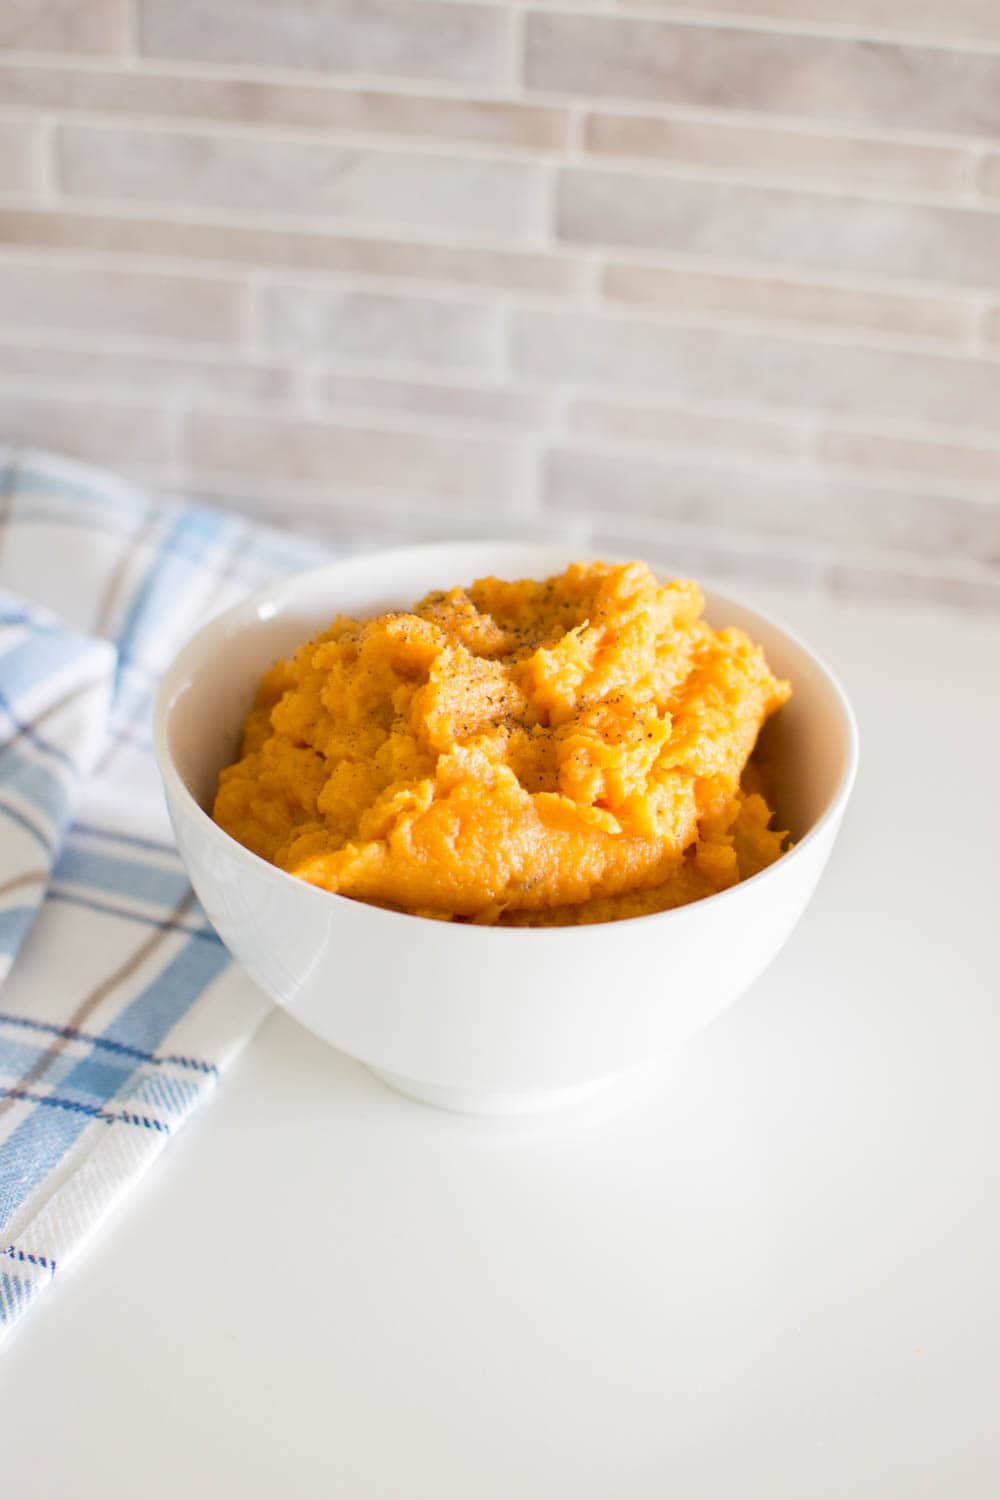 Mashed sweet potatoes with cracked black pepper, served in a white bowl